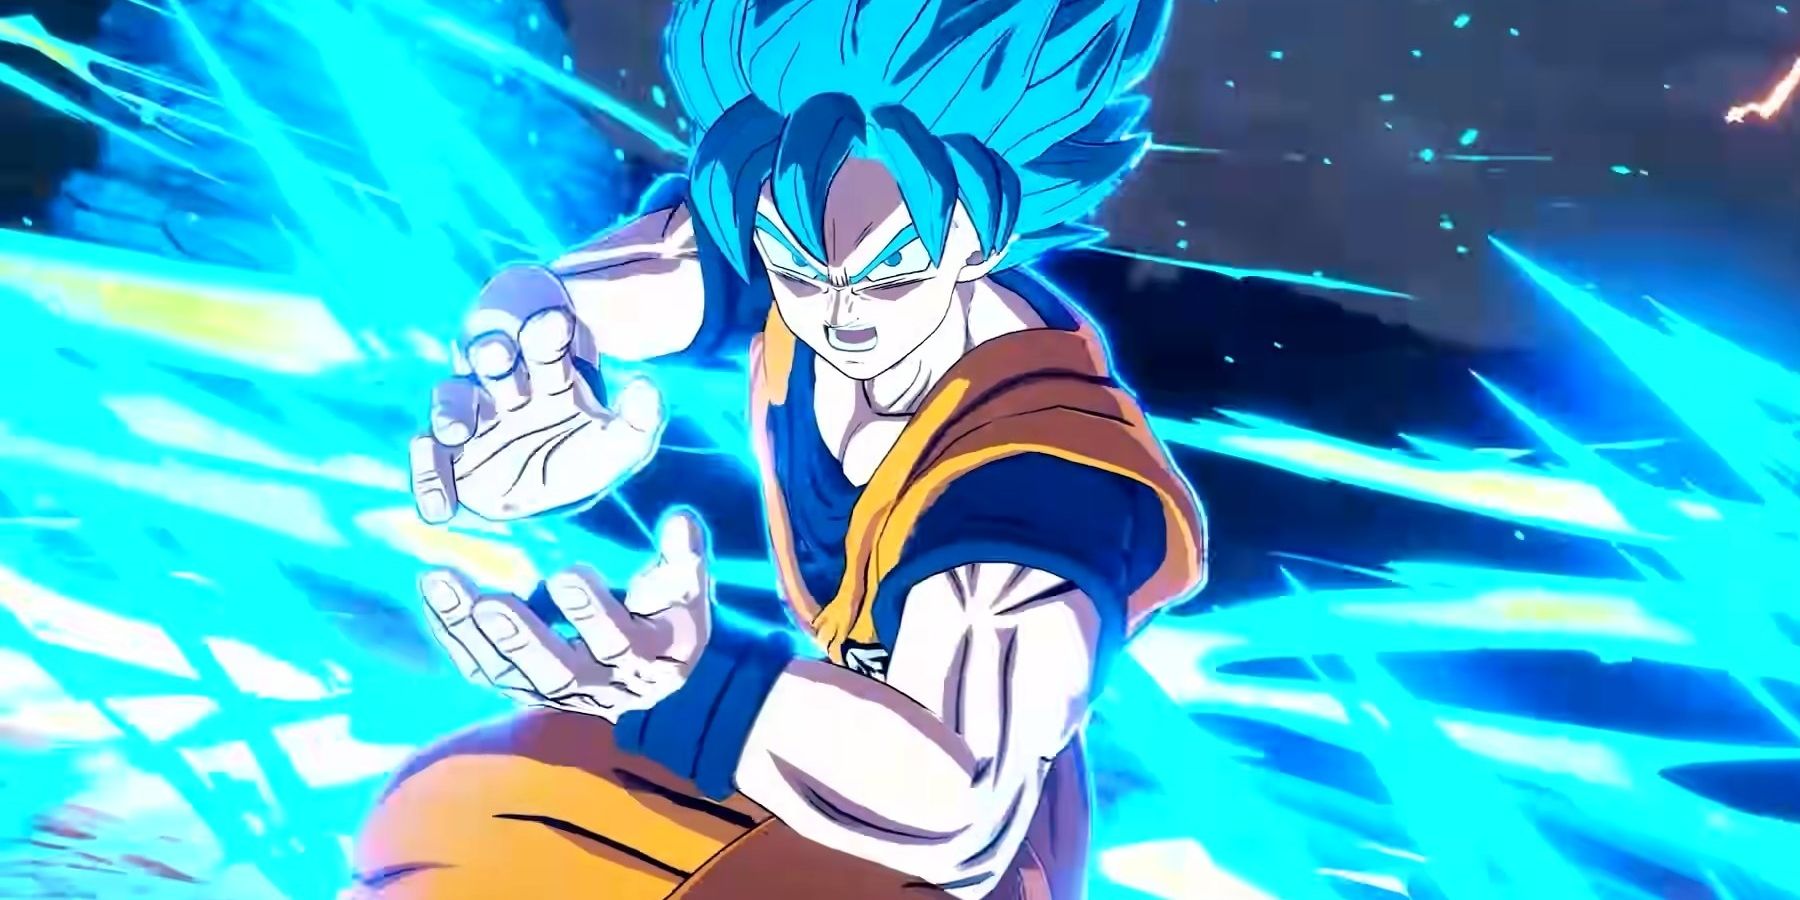 Goku in his Super Saiyan Blue form in Dragon Ball: Sparking! Zero poised to attack.